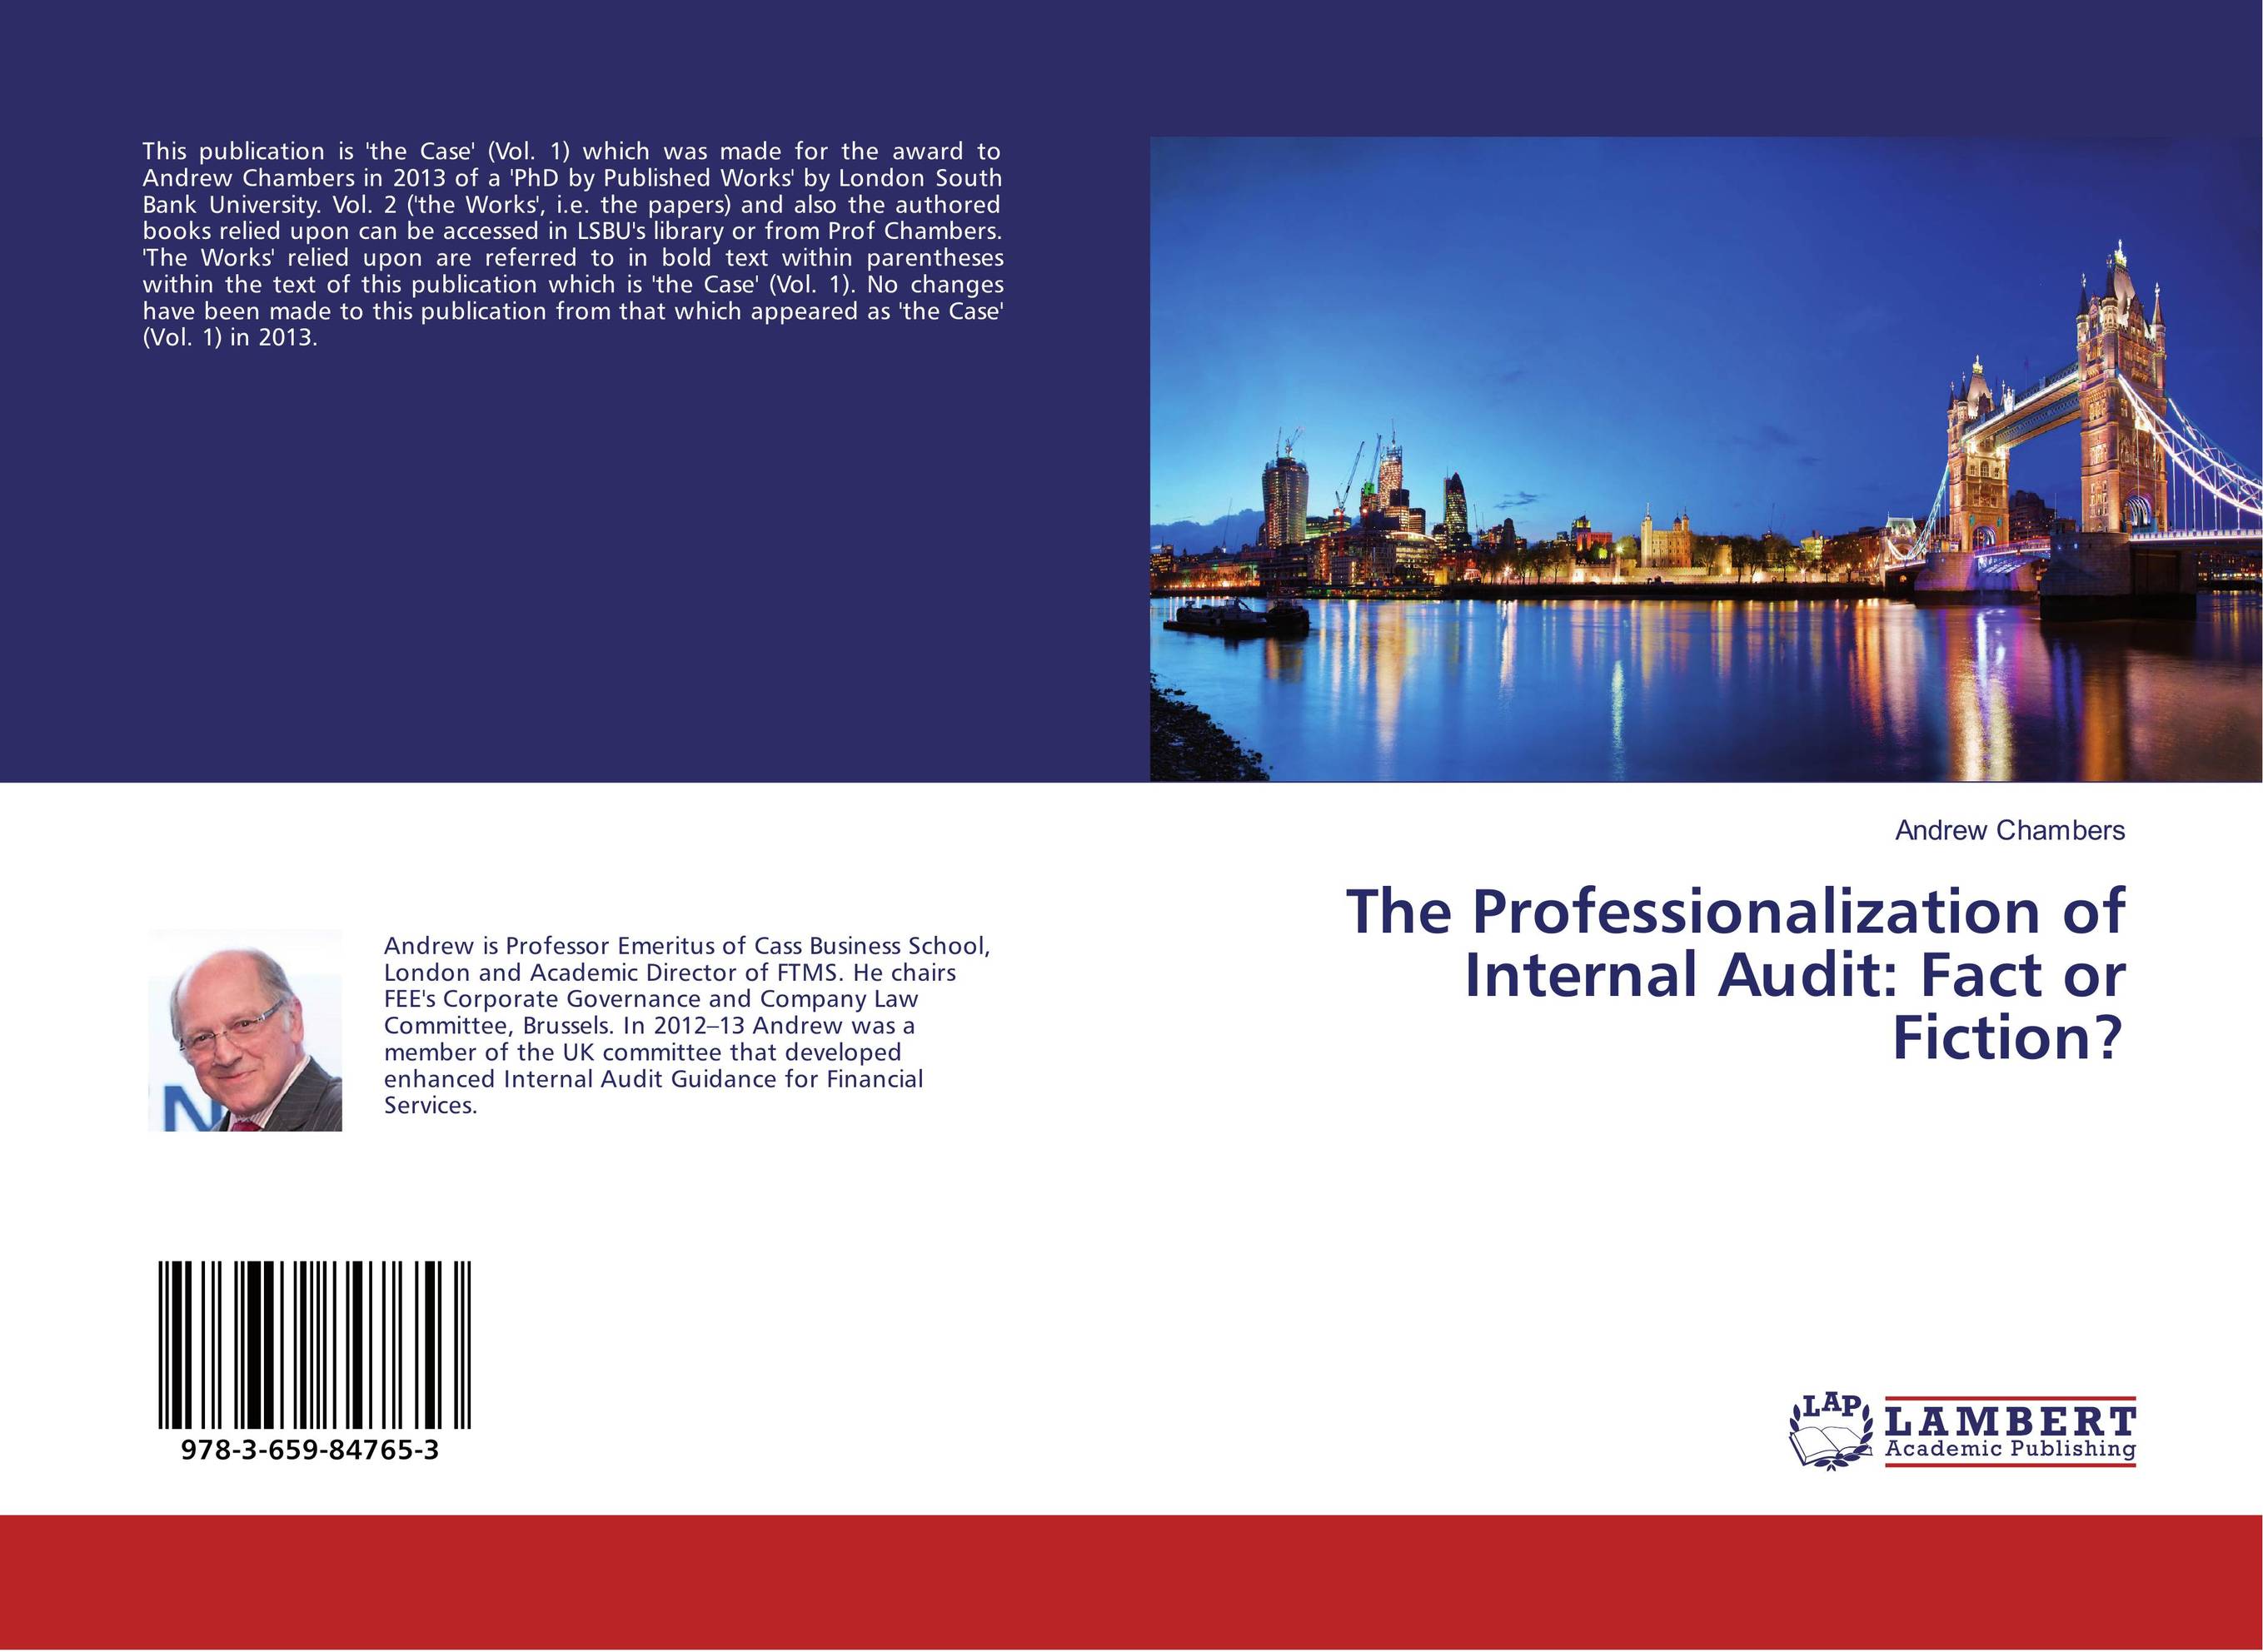 The Professionalization of Internal Audit: Fact or Fiction?